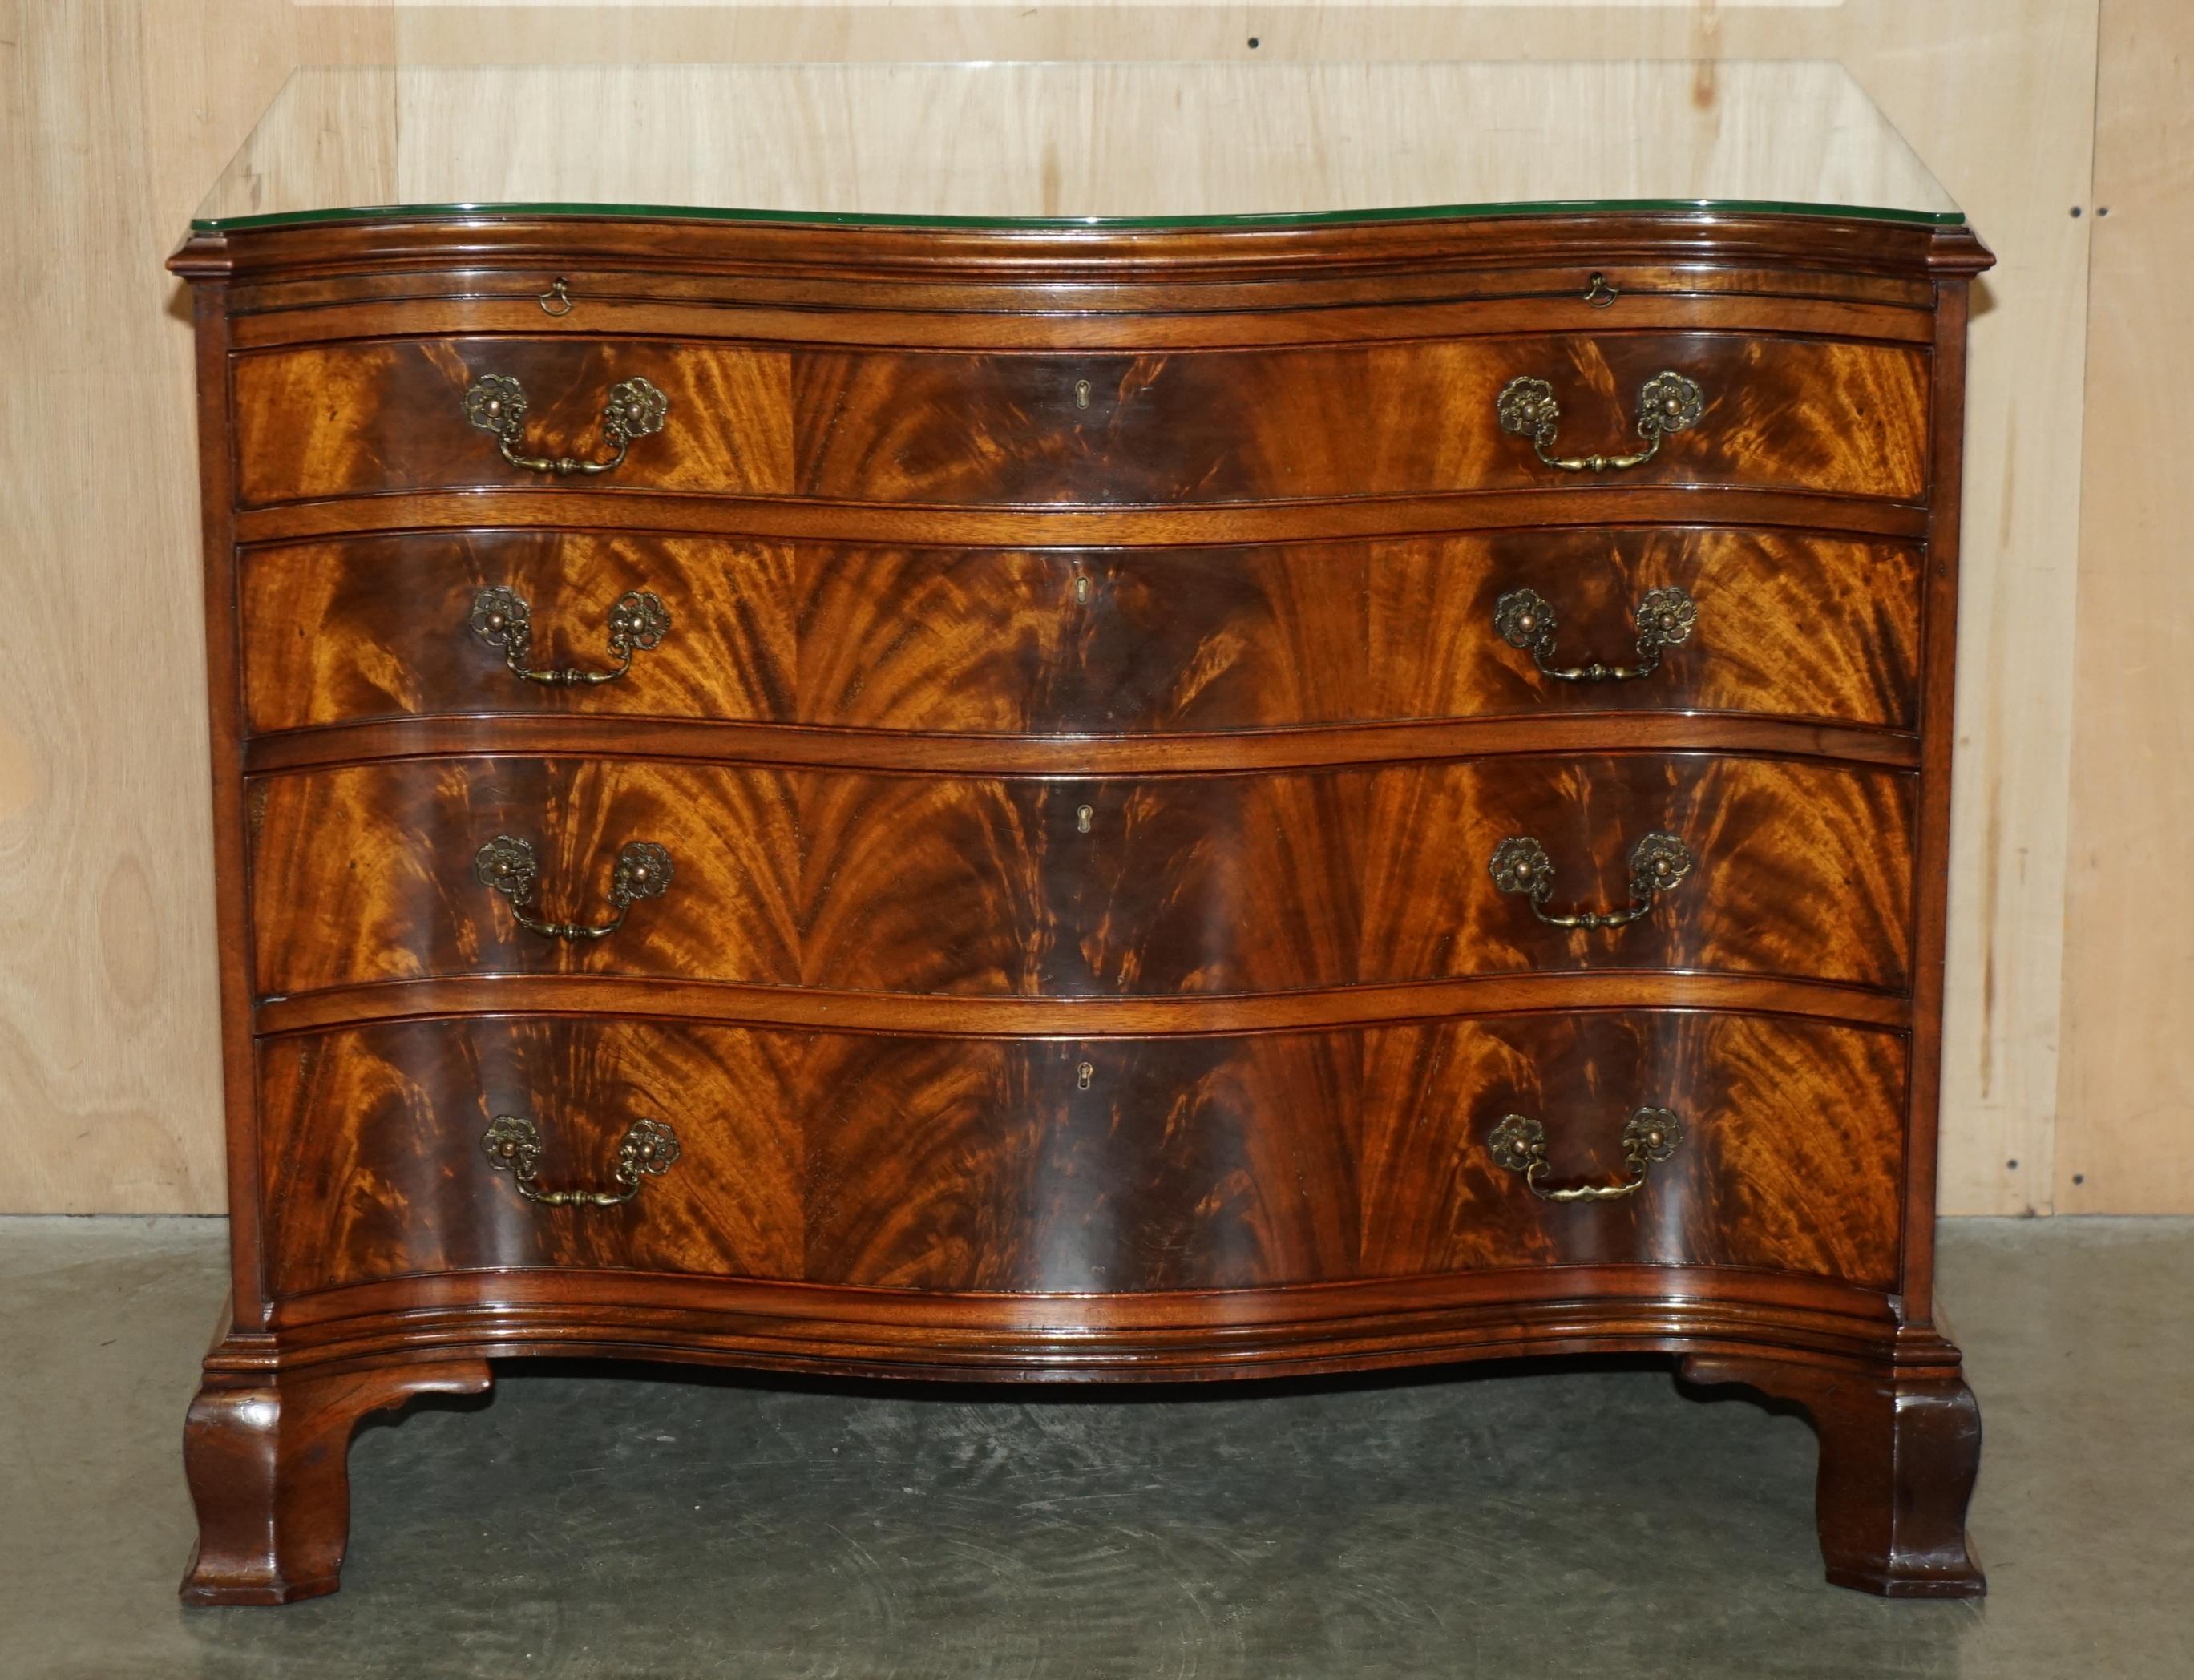 Hand-Crafted STUNNING FLAMED HARDWOOD HOWARD & SON'S SERPENTINE FRONTED CHEST OF DRAWERs For Sale